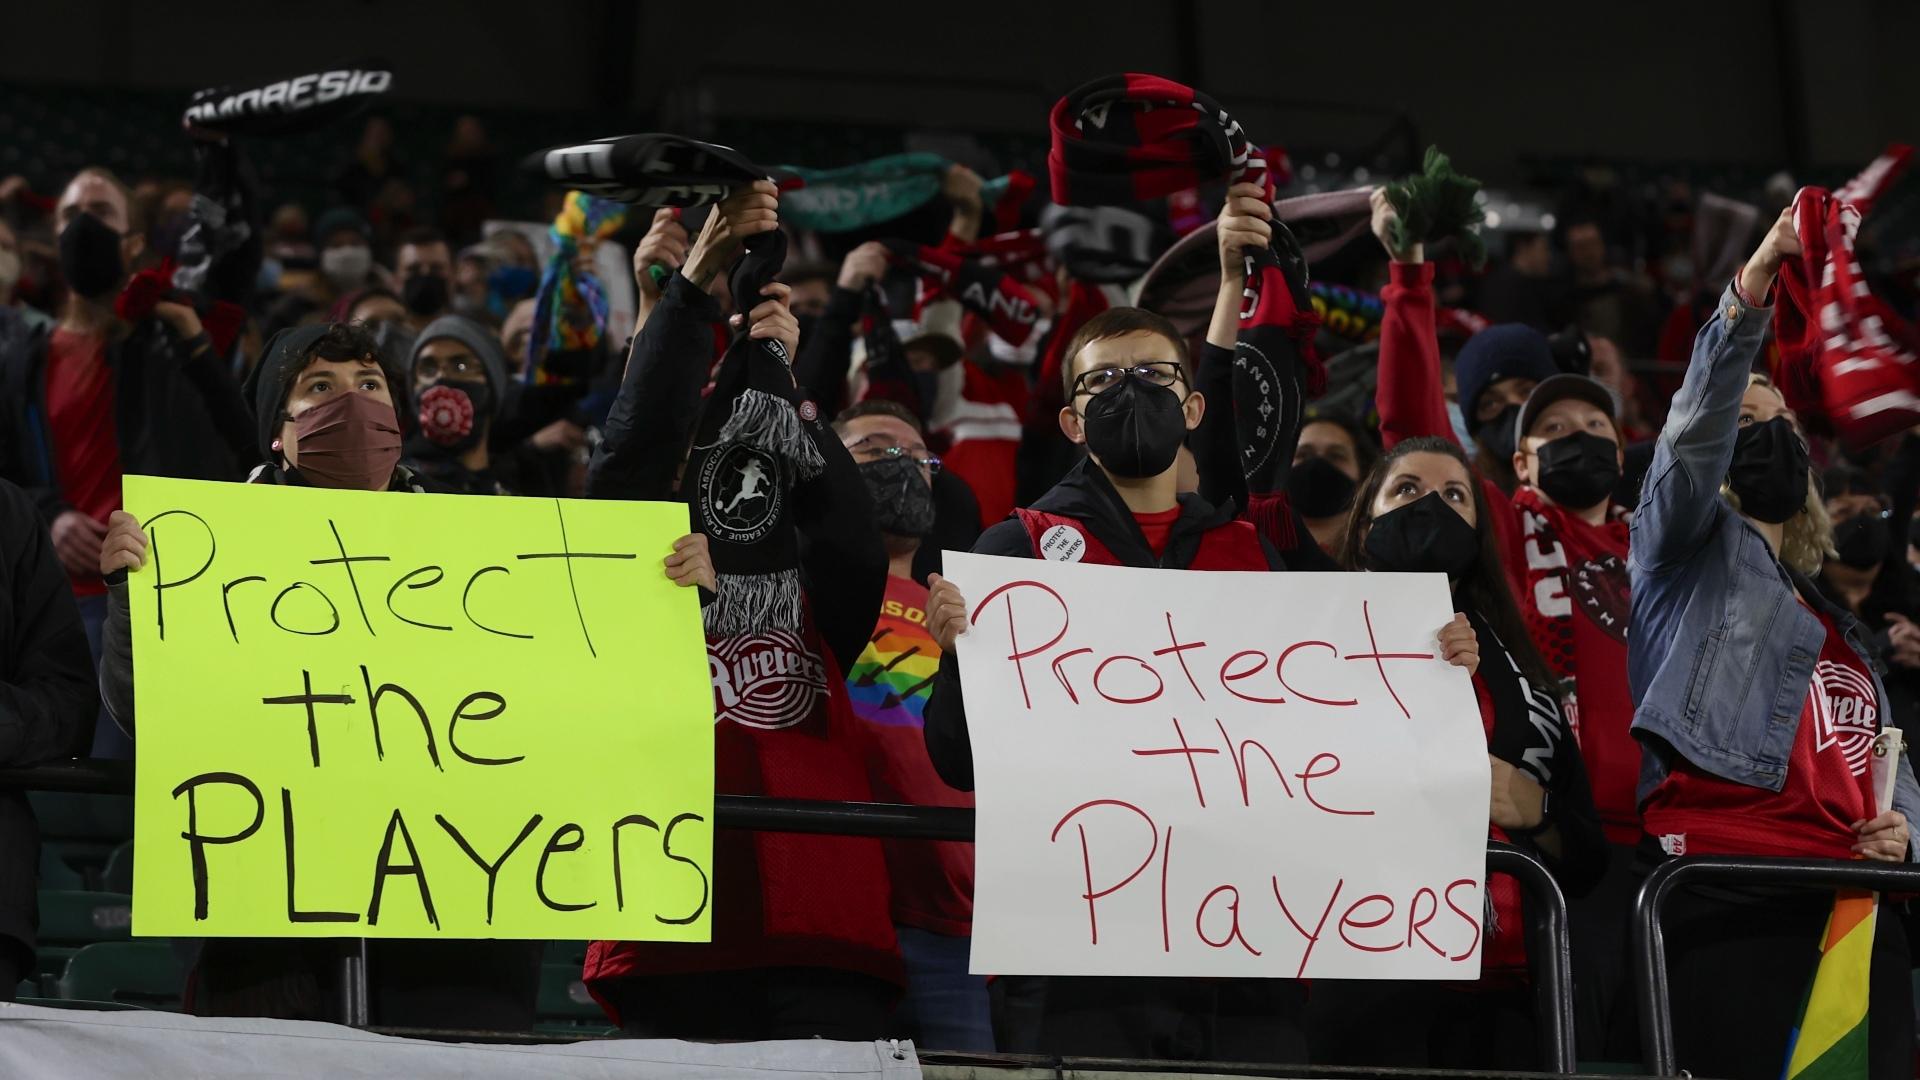 Portland Thorns fans hold signs during the first half of the team's National Women's Soccer League soccer match against the Houston Dash in Portland, Ore., Oct. 6, 2021. An investigation commissioned by the NWSL and its players union found “widespread misconduct” directed at players dating back to the beginnings nearly a decade ago of the country's top women's professional league. (AP Photo / Steve Dipaola, File)